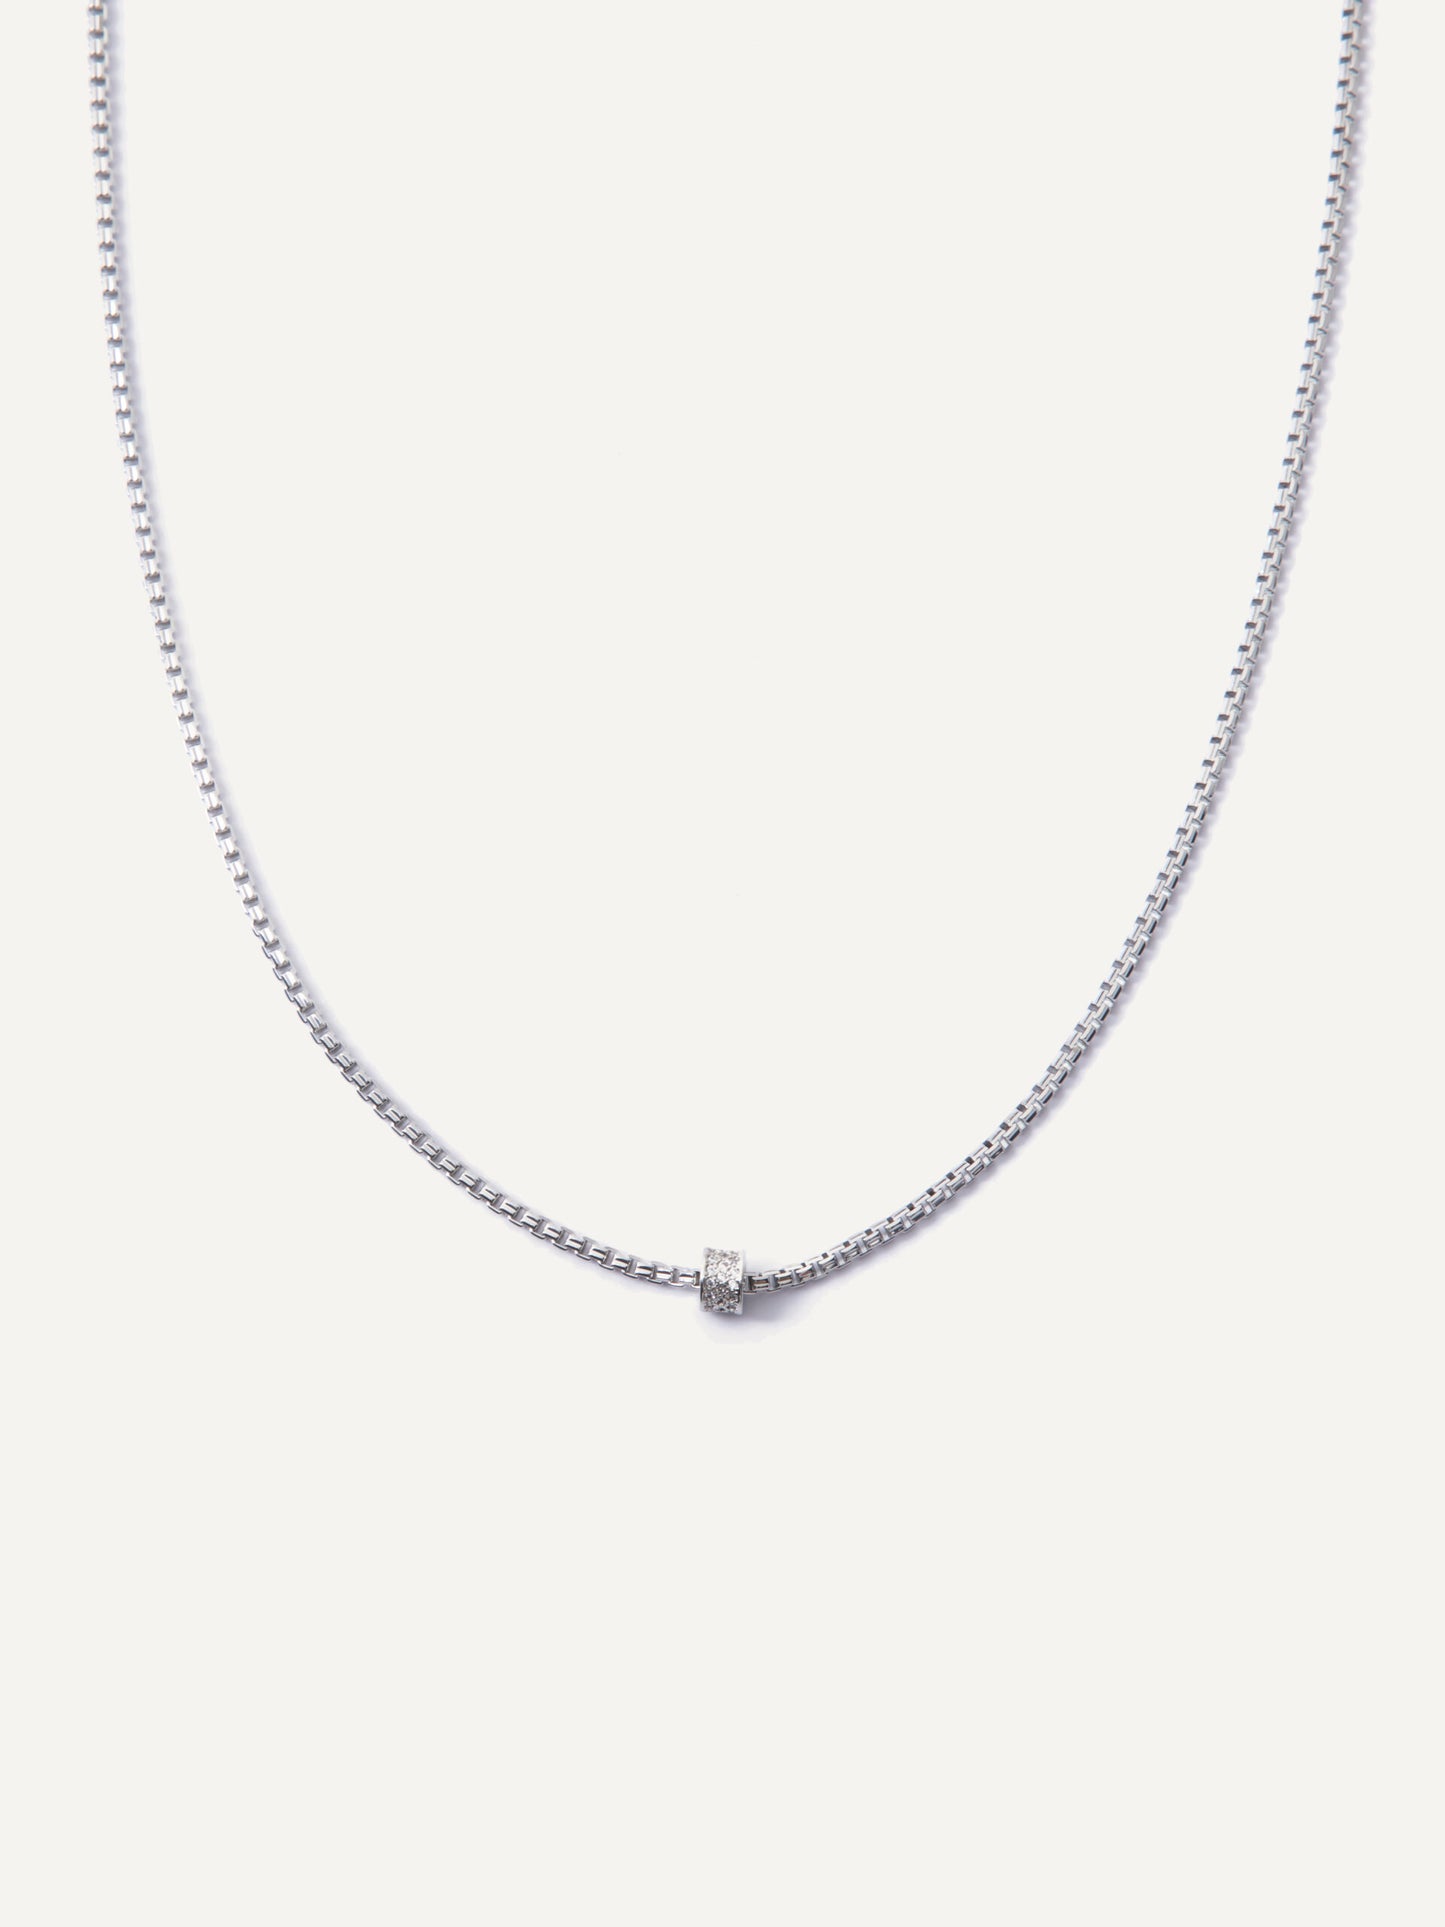 LANA Necklace in Silver